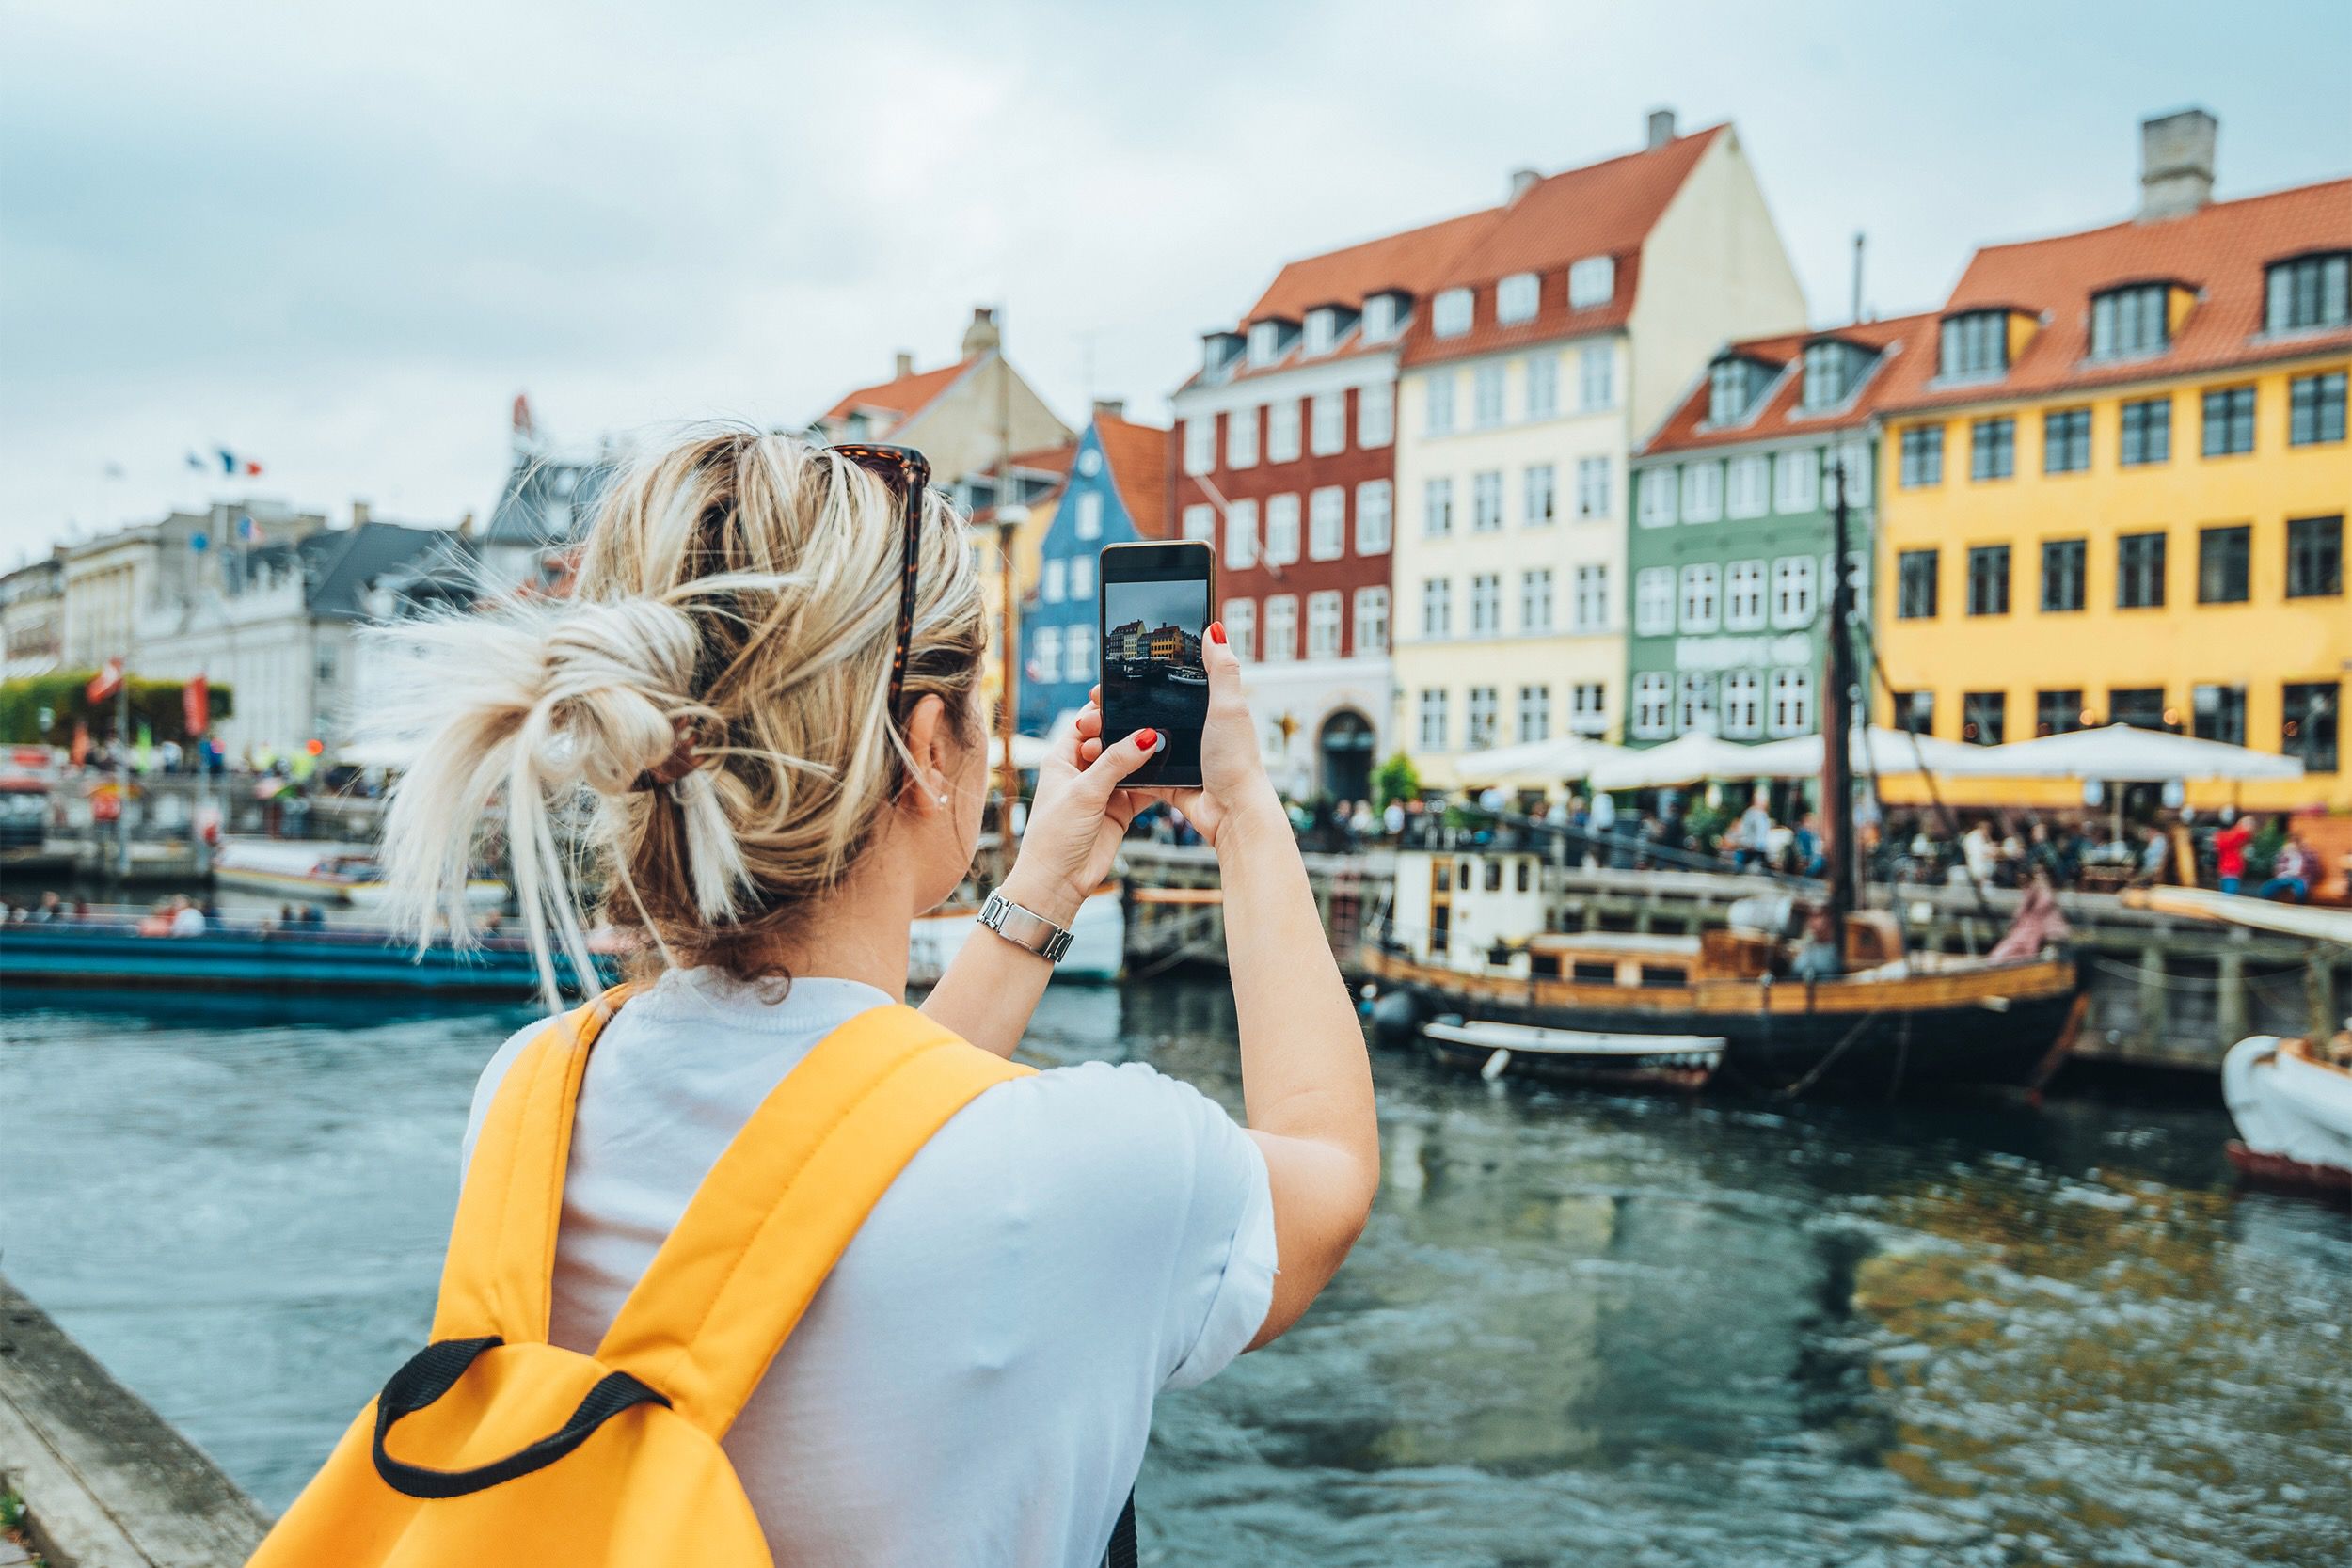 <p>Even if it's just a smartphone camera, seek out tips and tutorials to help you take better photos and videos. Images of a trip are perhaps the cheapest souvenirs — and, for many people, the most valuable.</p><div class="rich-text"><p>This article was originally published on <a href="https://blog.cheapism.com/travel-resolutions/">Cheapism</a></p></div>